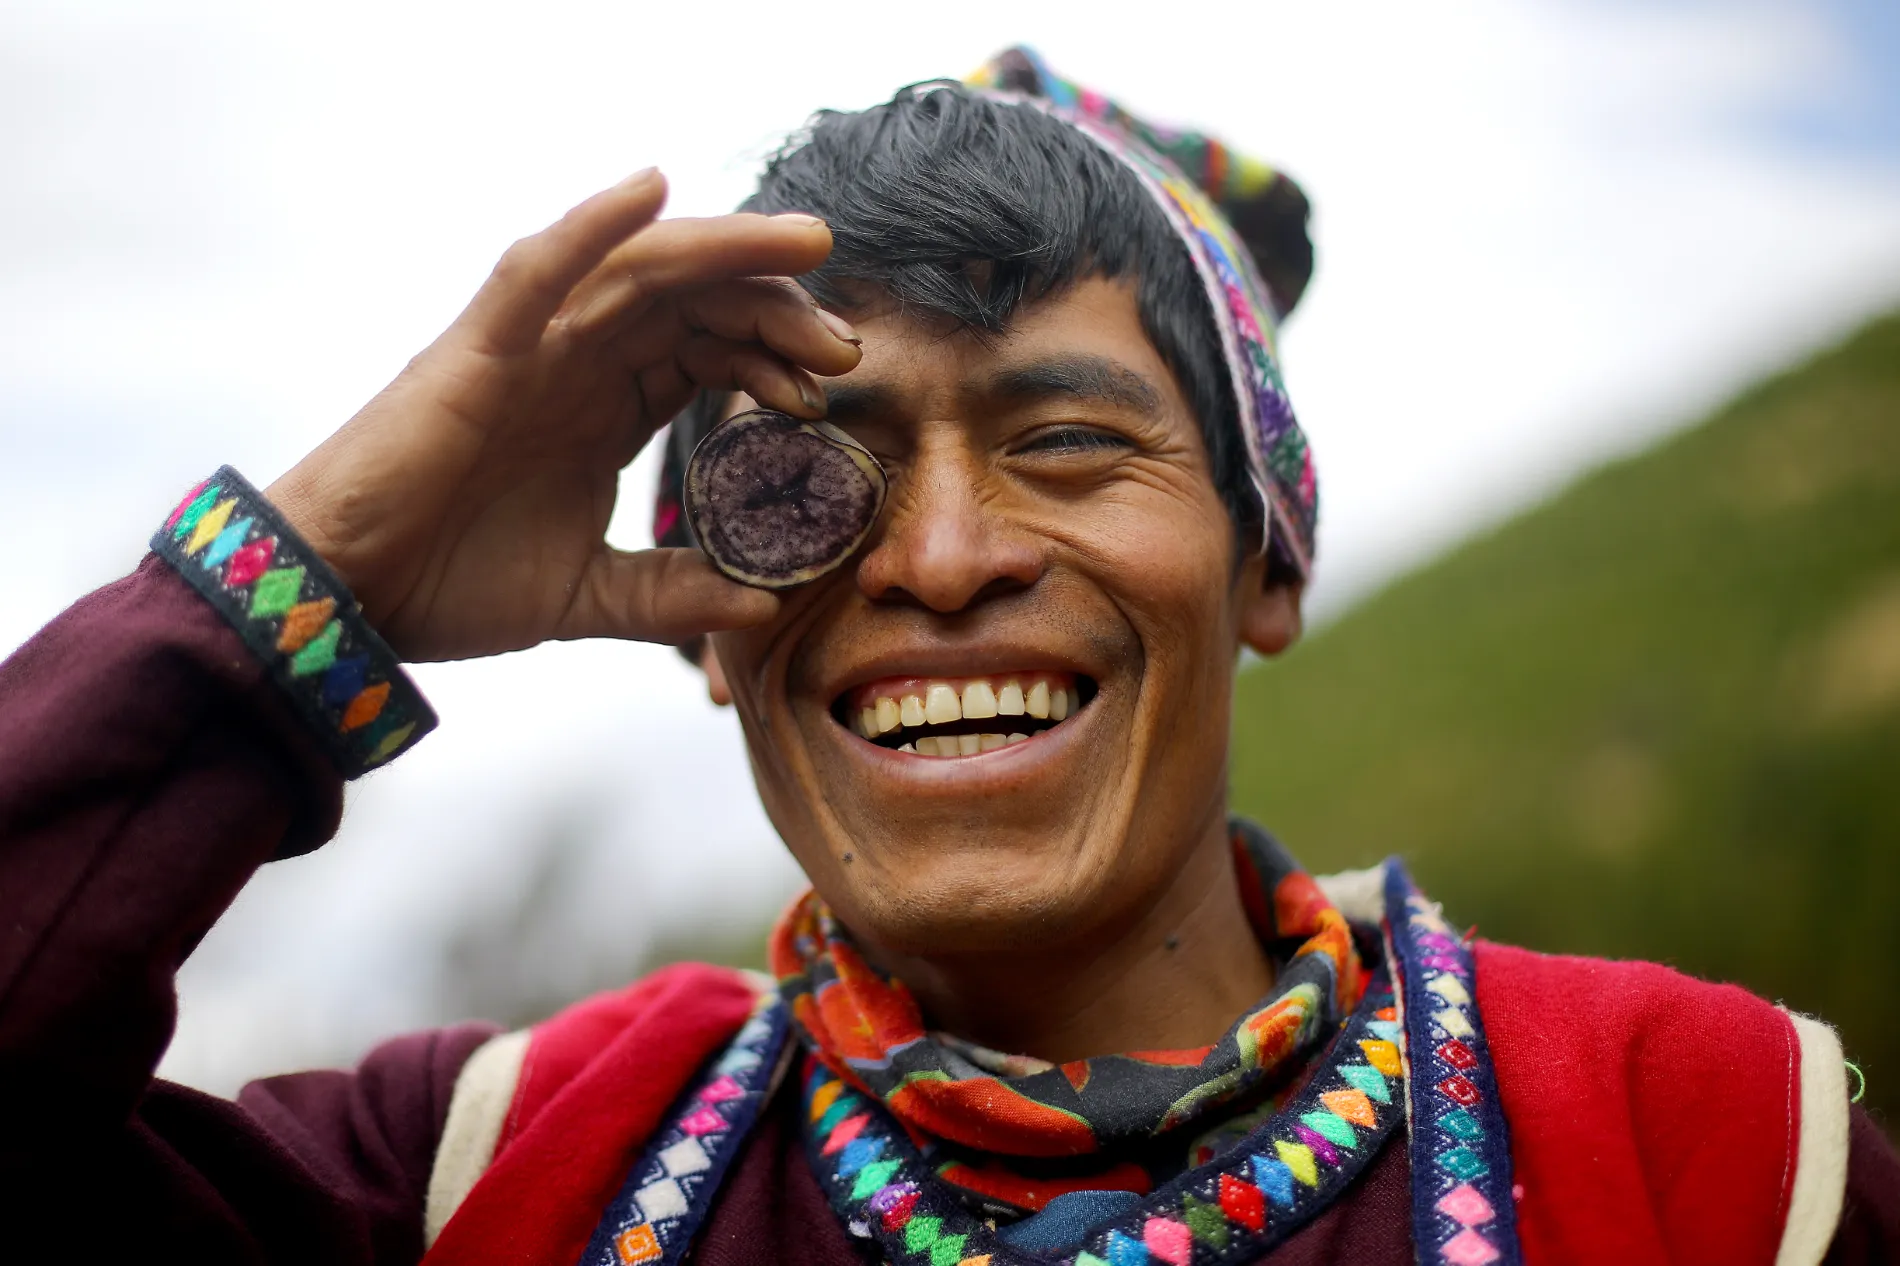 Farmer Marco Pacco smiles for the picture holding a purple potato usually used by food companies to produce snacks.